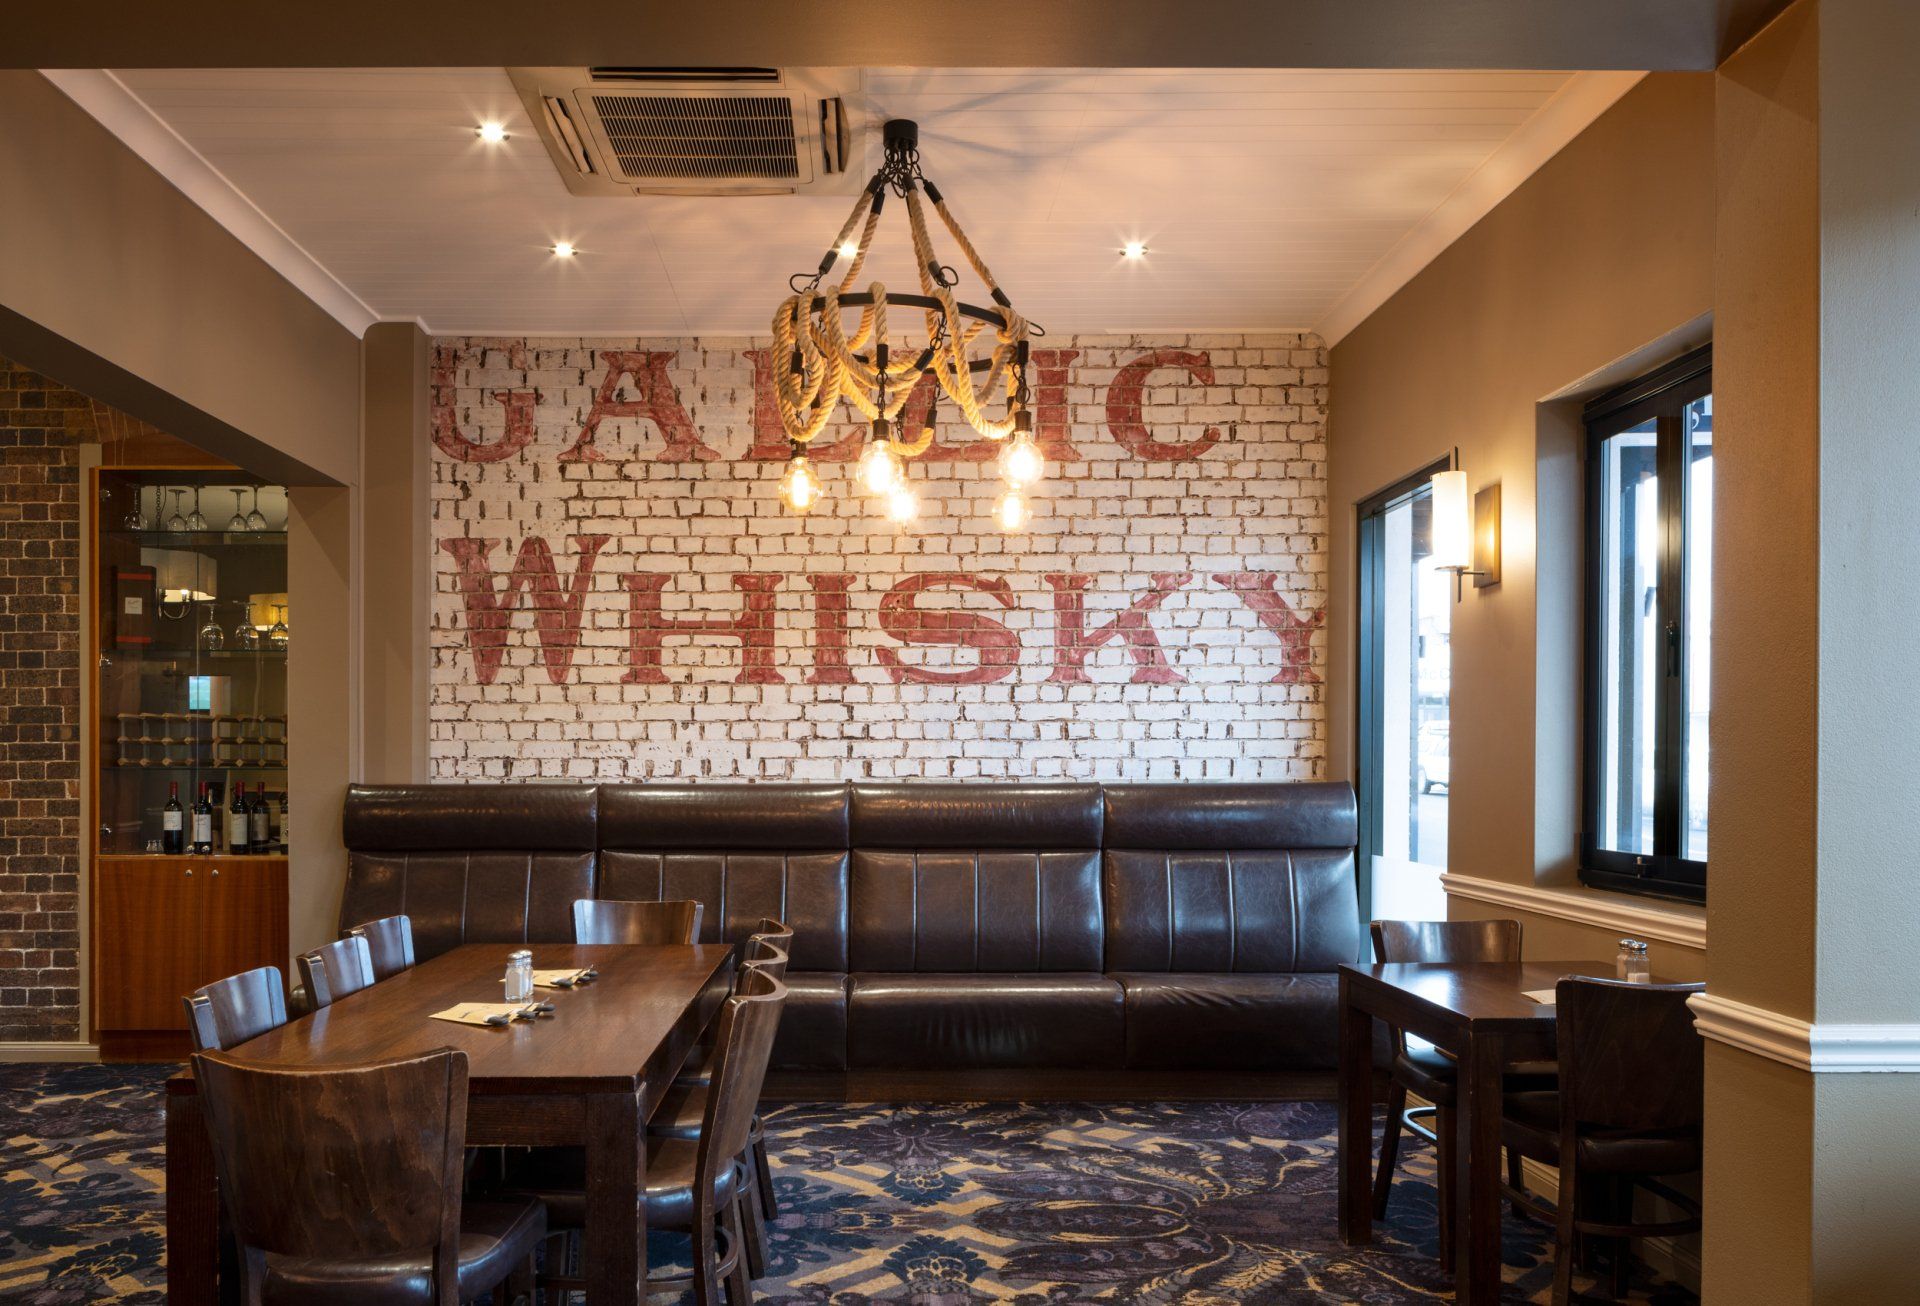 a room with a brick wall that says whisky on it